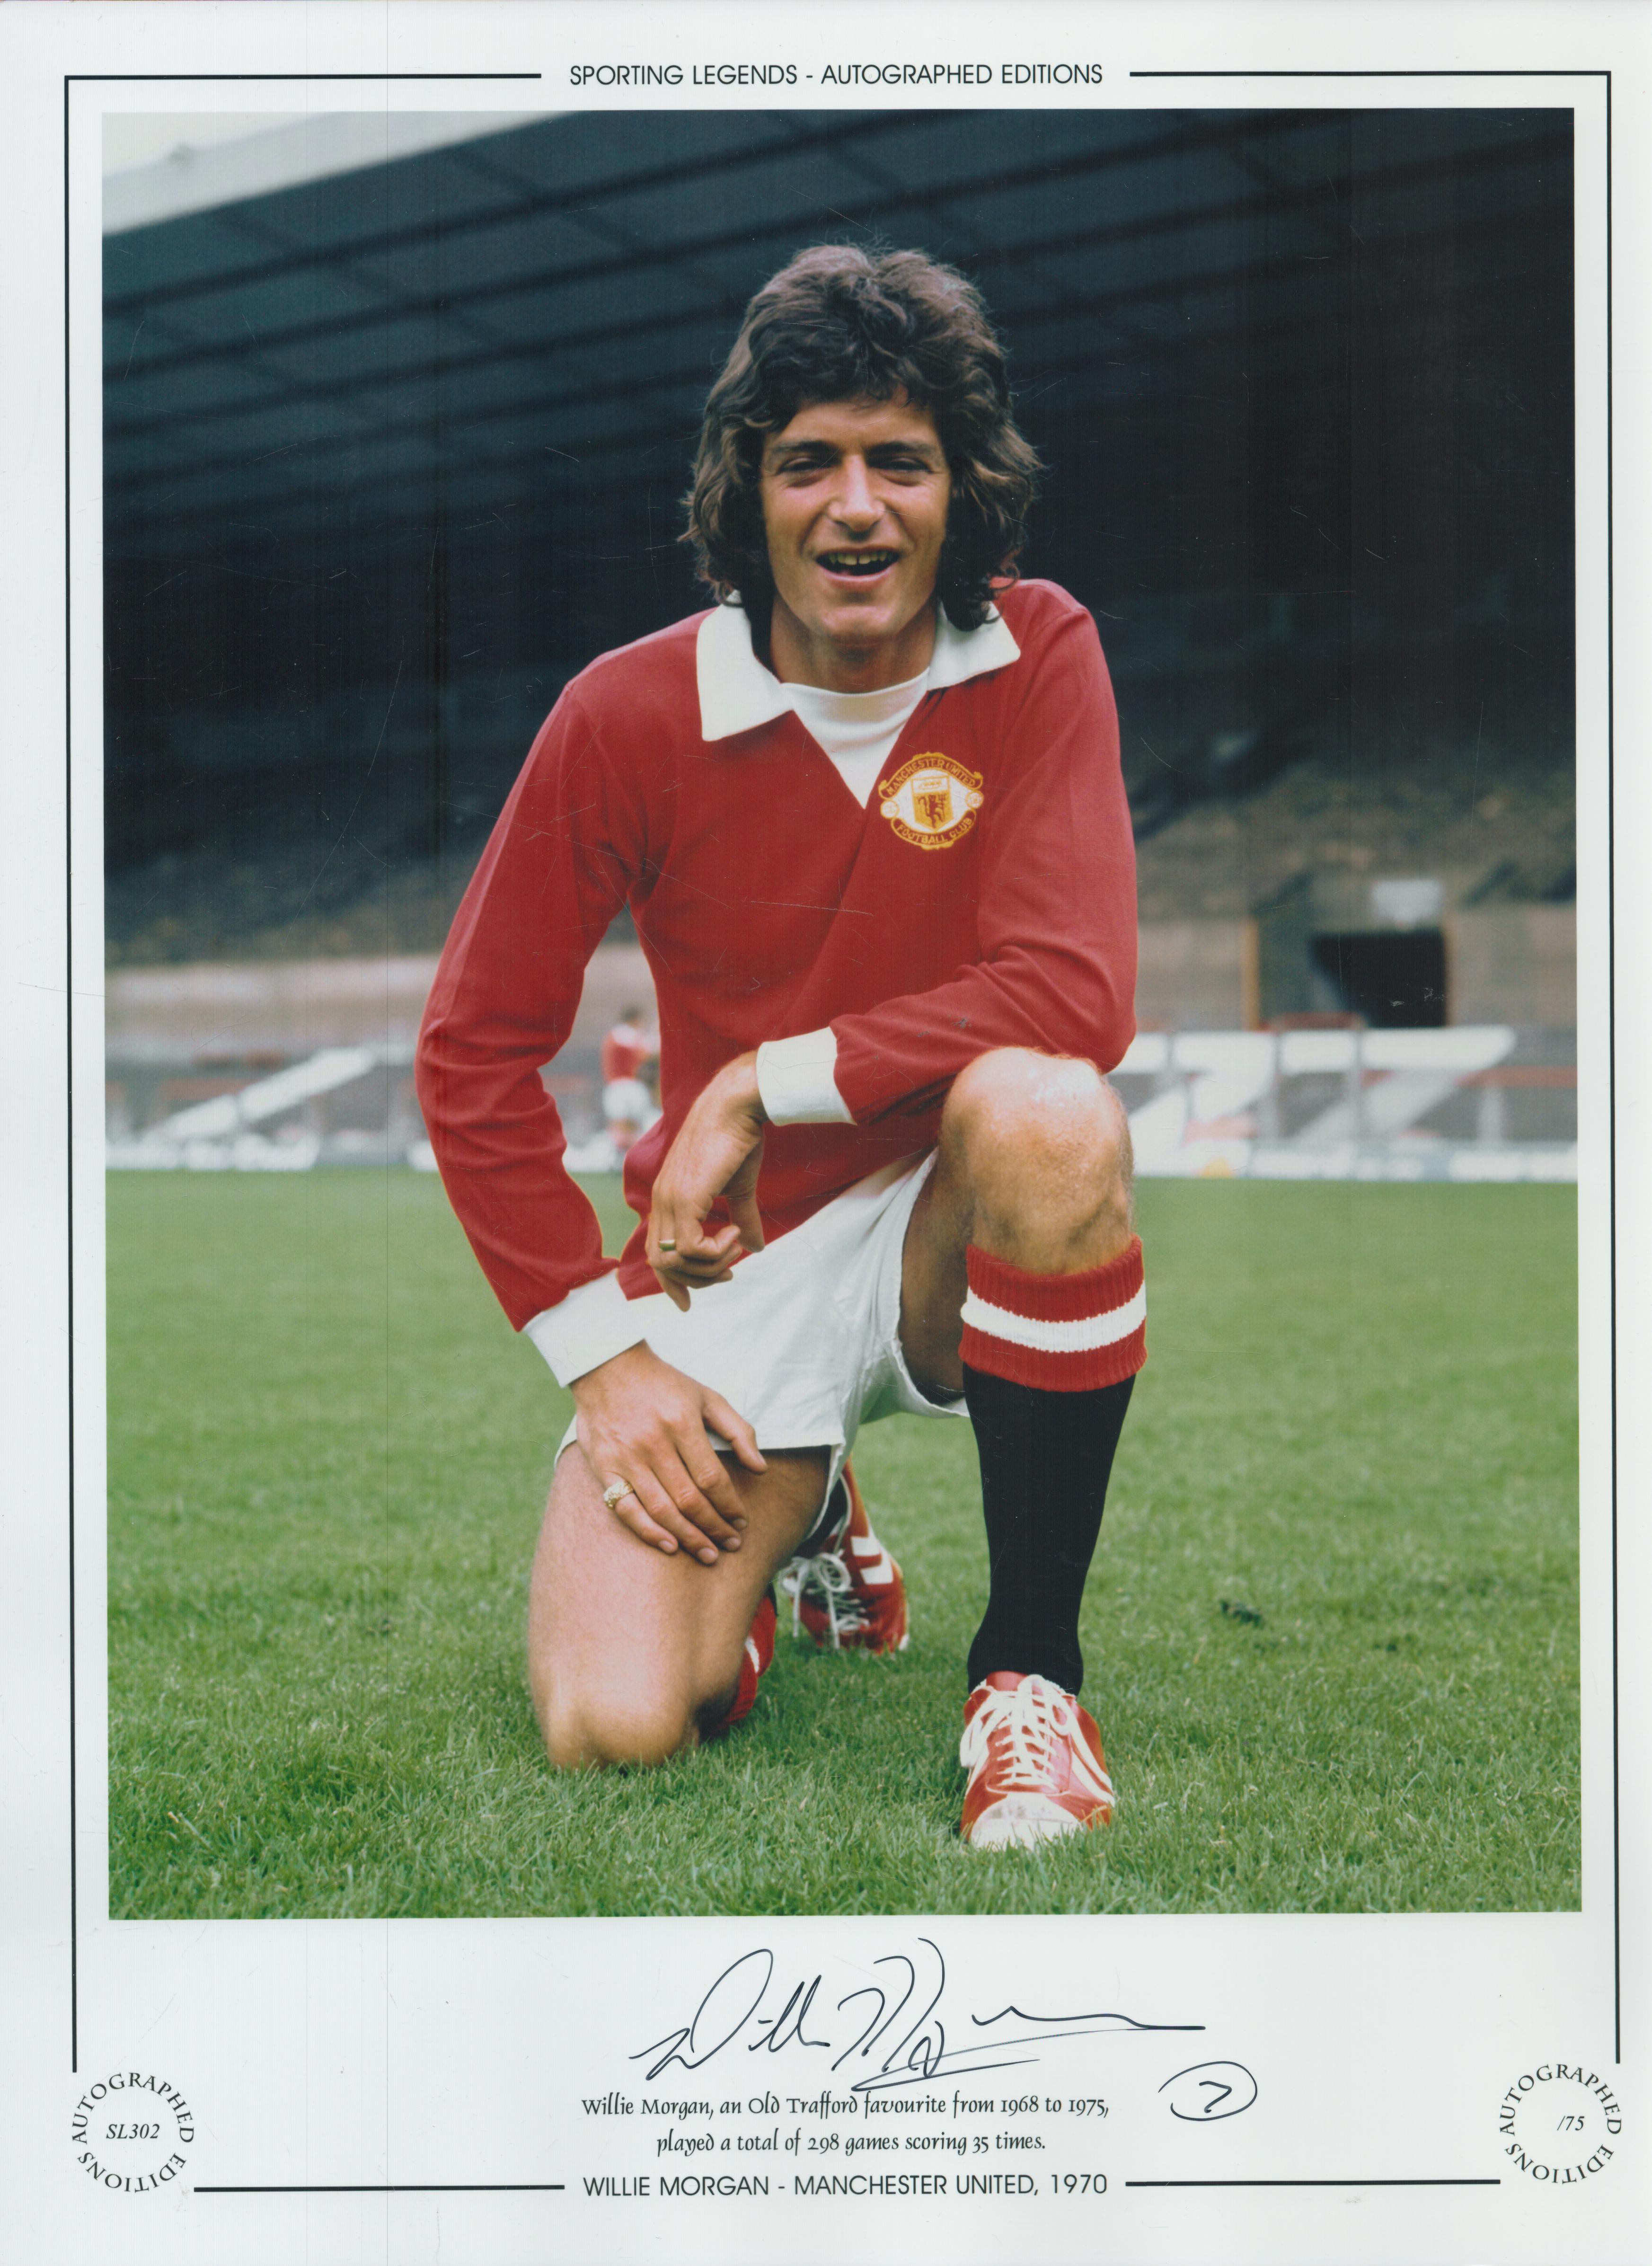 Autographed WILLIE MORGAN 16 x 12 Limited Edition : Col, depicting Man United winger WILLIE MORGAN